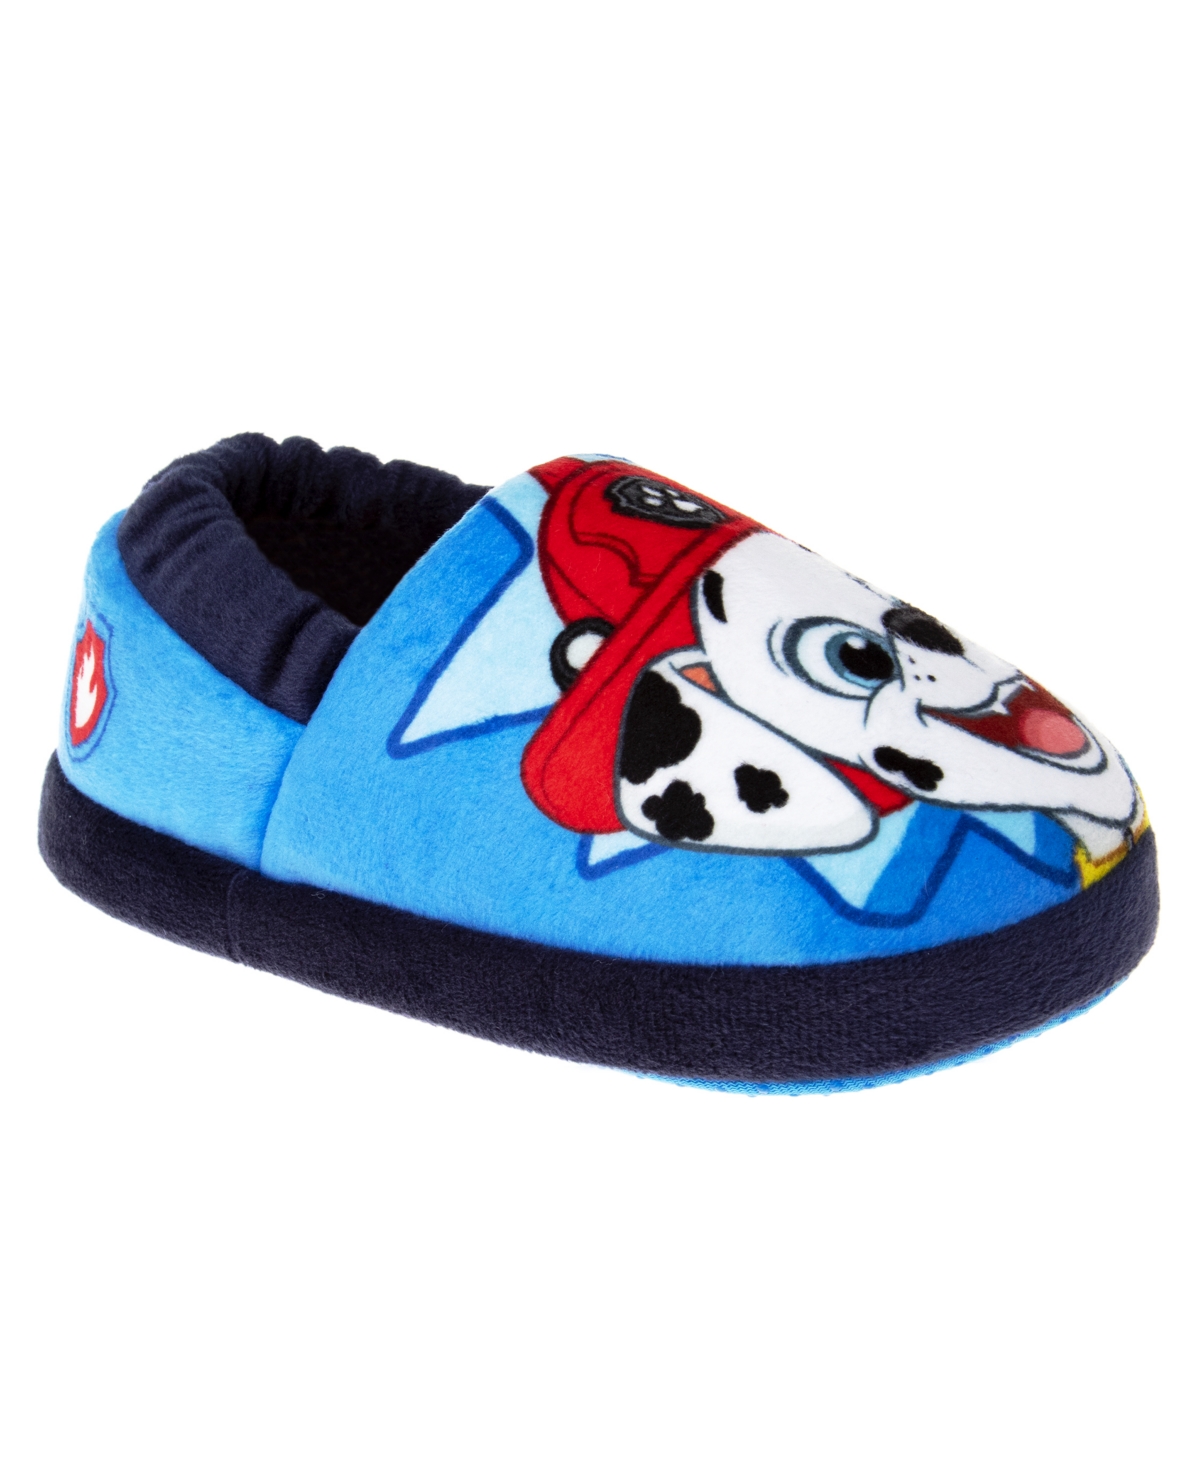 Nickelodeon Kids' Toddler Boys Paw Patrol Marshall And Chase Dual Sizes House Slippers In Blue,navy